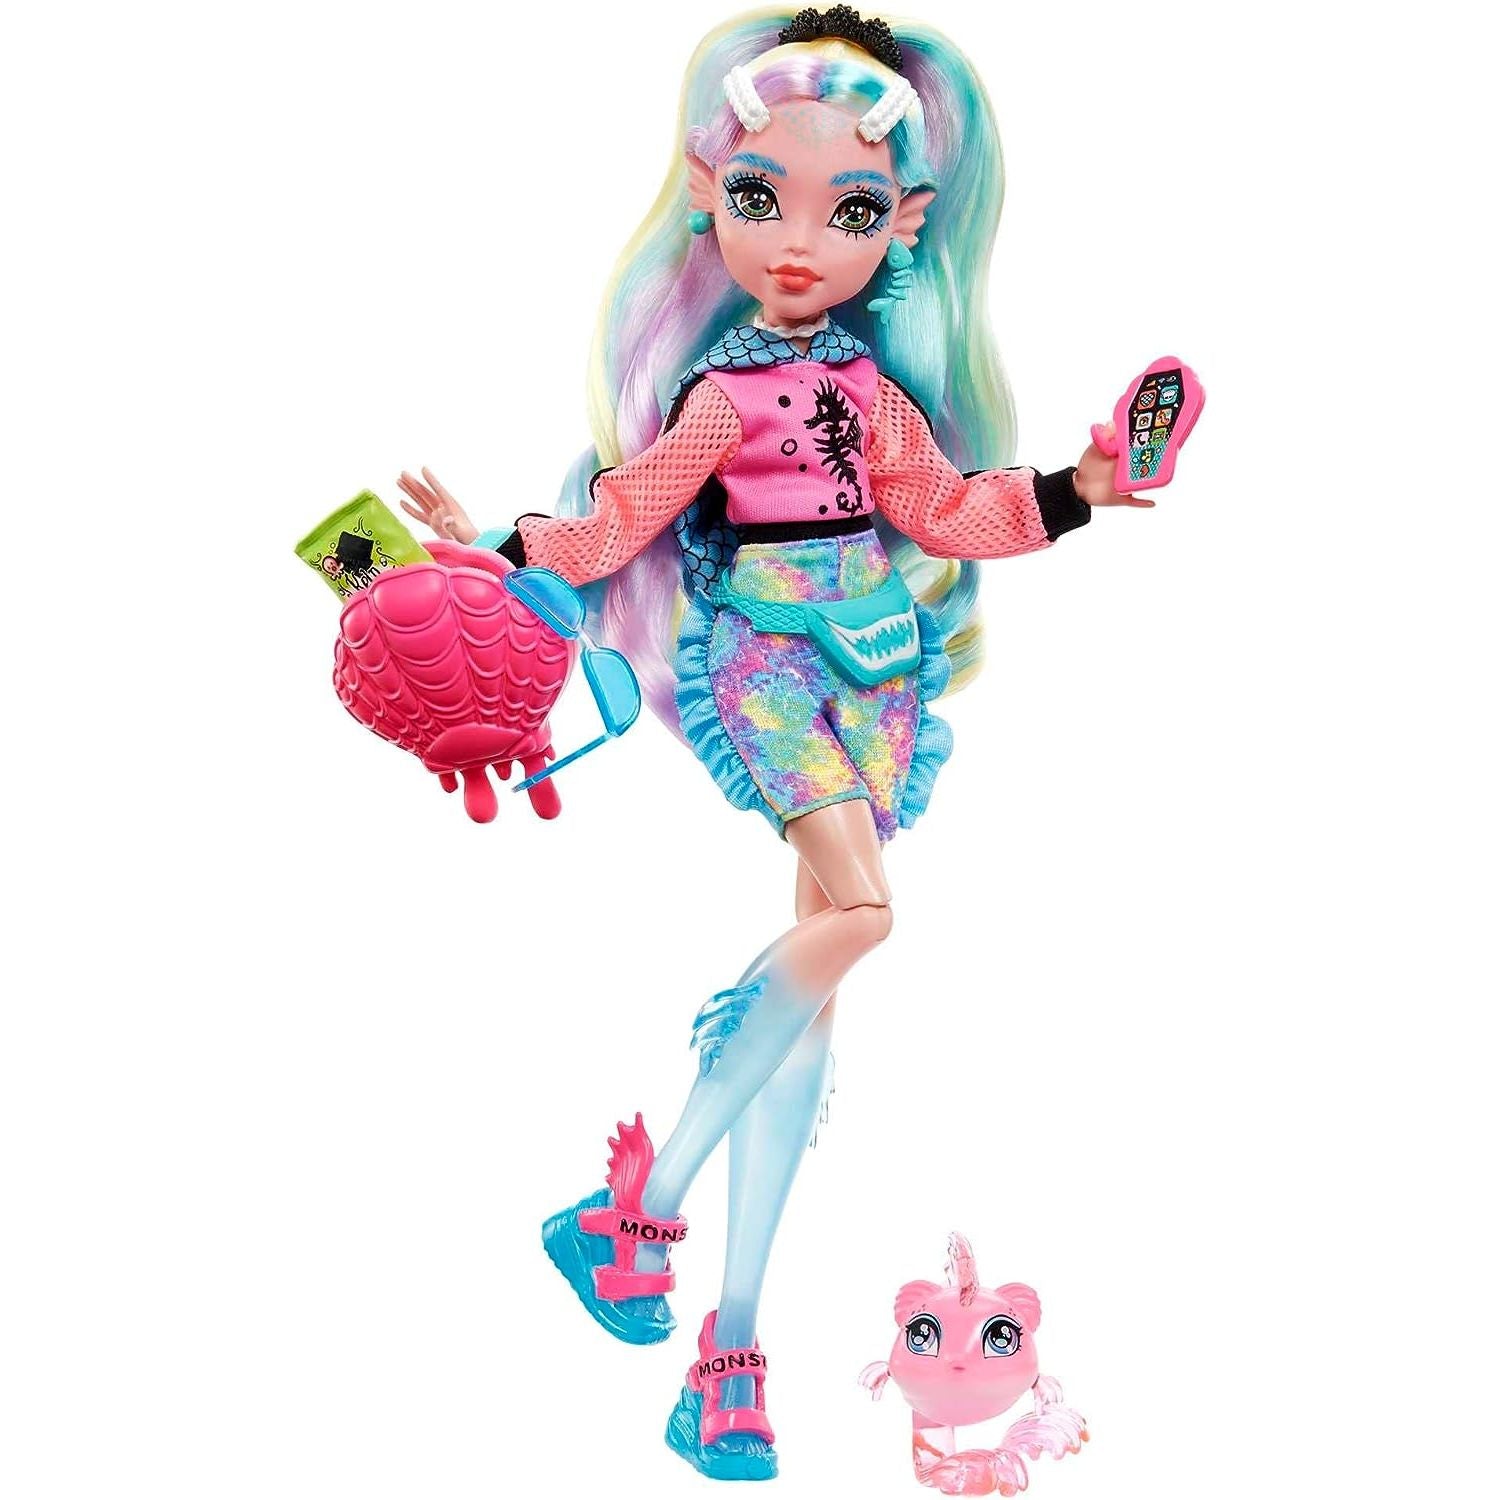 Mattel Monster High Lagoona Blue Fashion Doll with Colorful Streaked Hair, Signature Look, Accessories & Pet Piranha